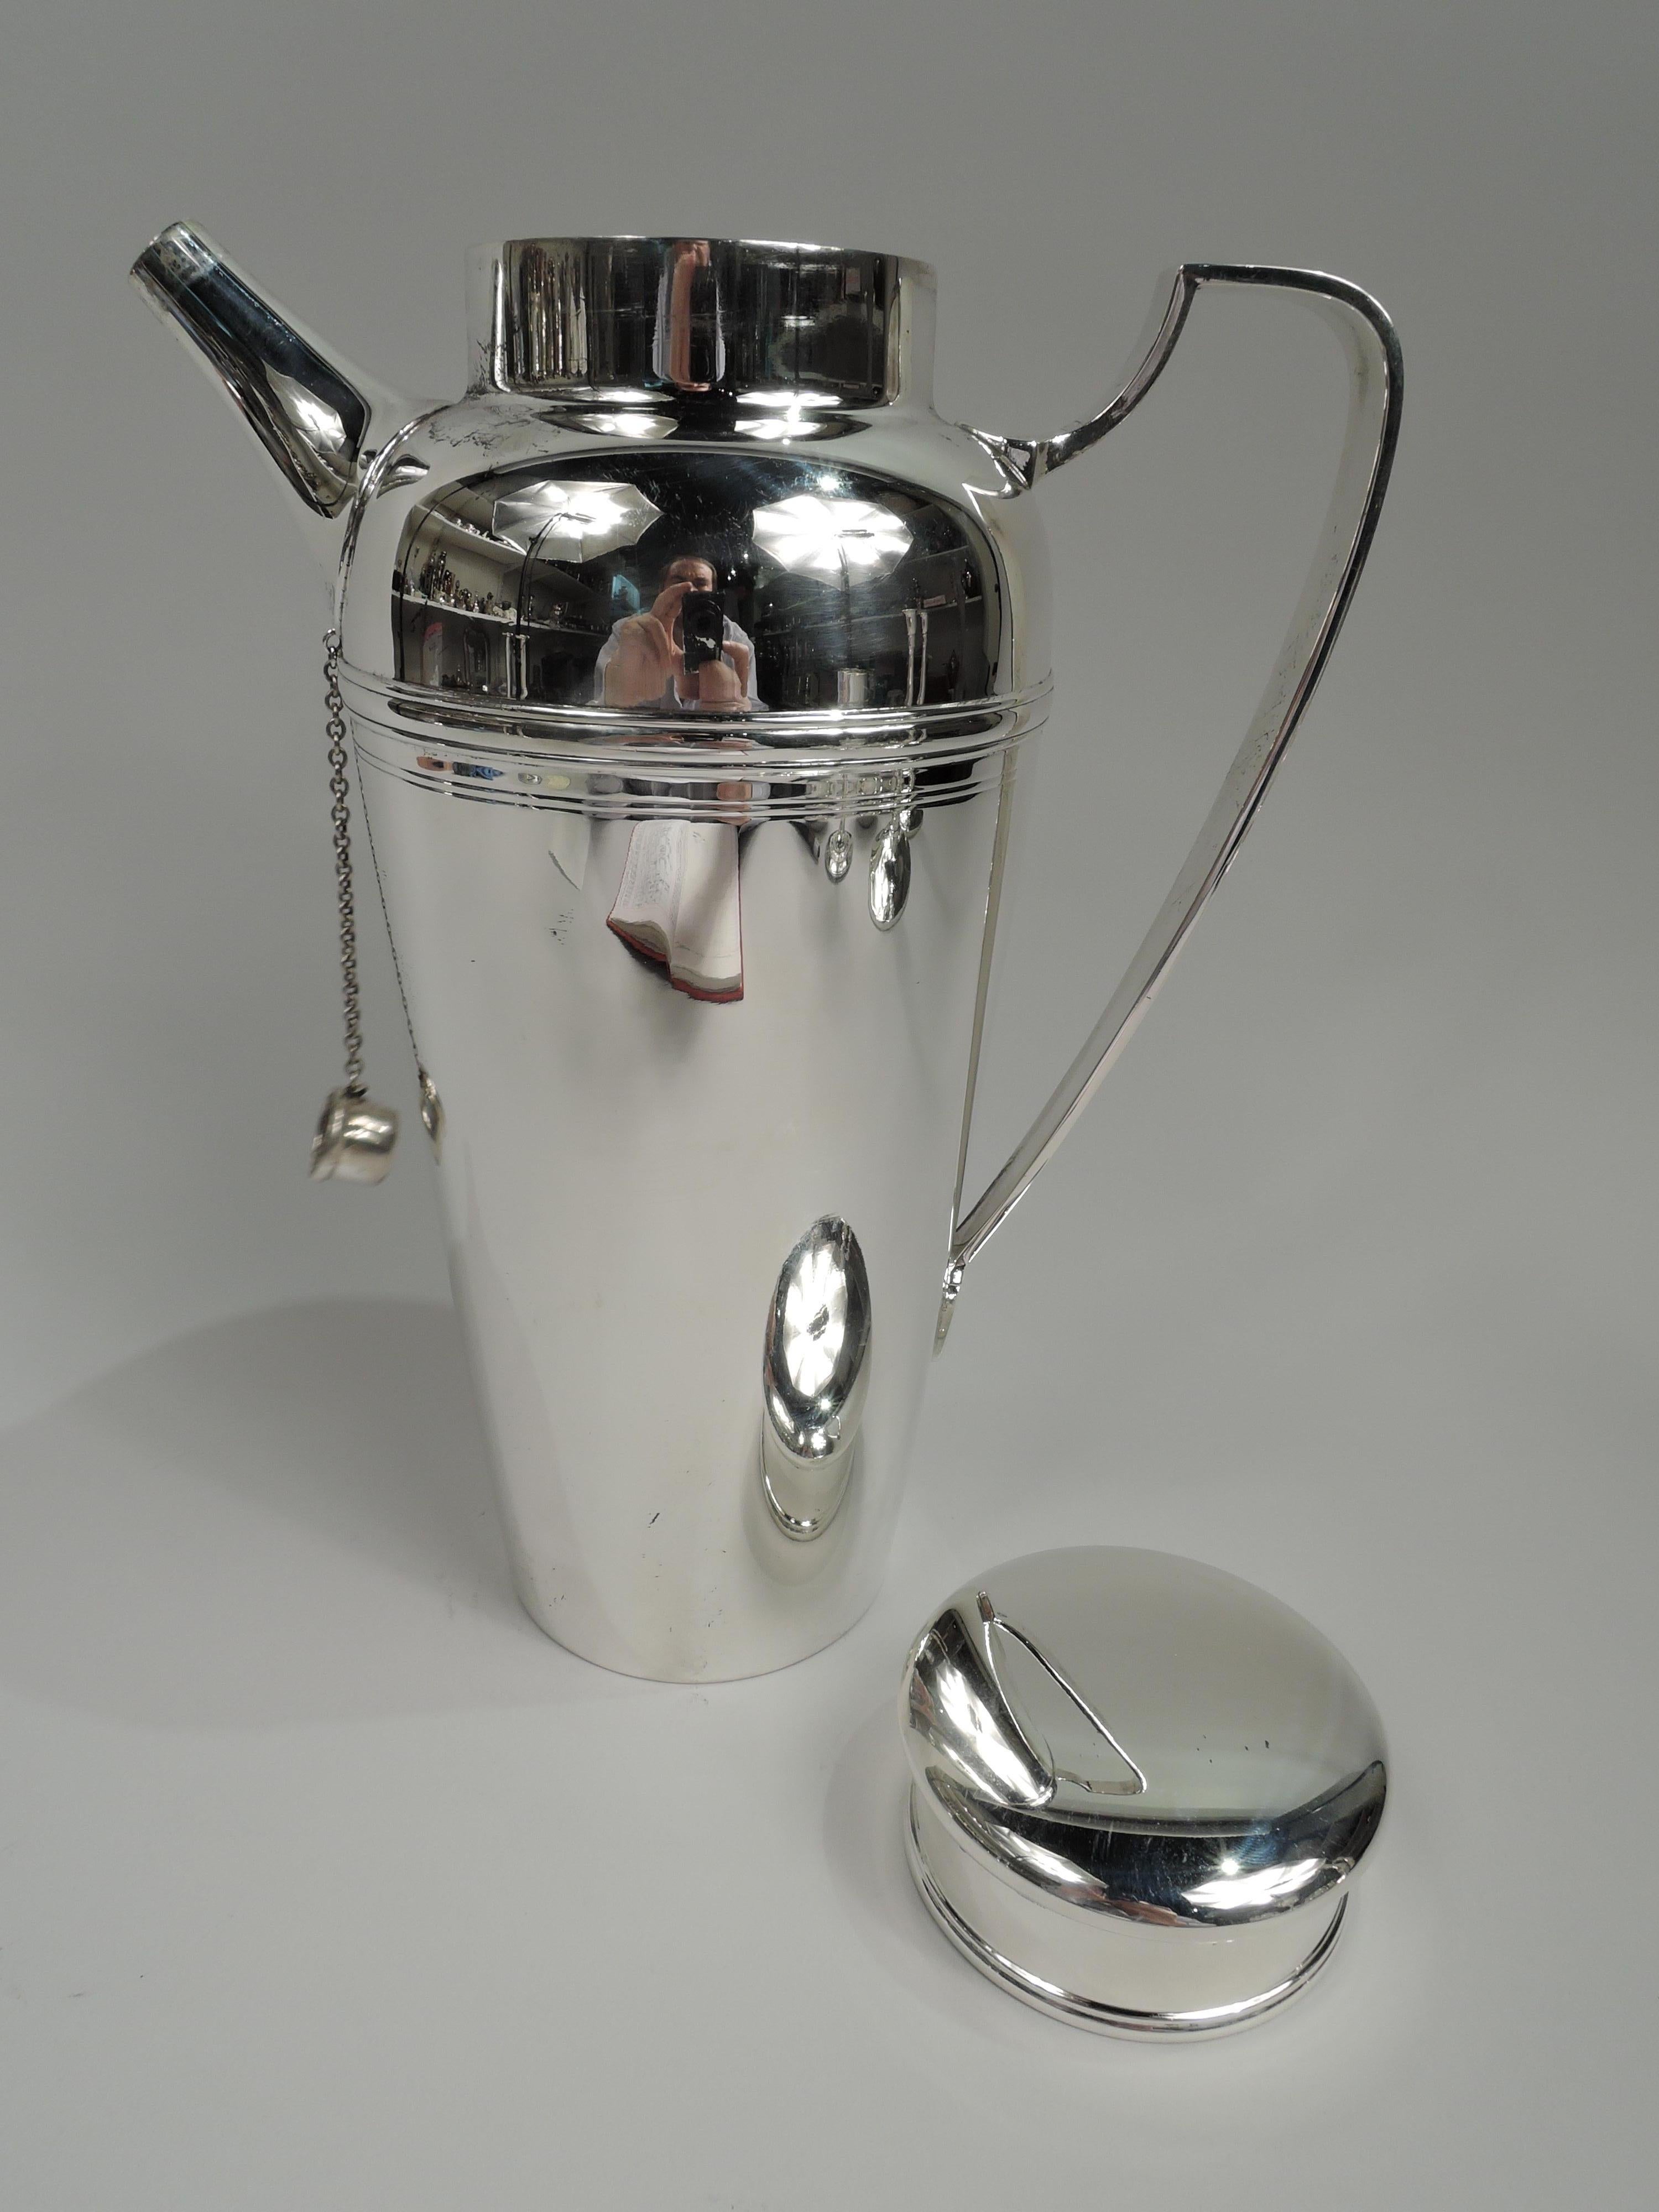 Party-size sterling silver cocktail shaker. Made by Tiffany & Co. in New York, ca 1929. Tapering bowl, curved shoulder, scrolled-bracket handle, stubby tapering spout with built-in strainer and chained cap, and short neck with flat, over hanging